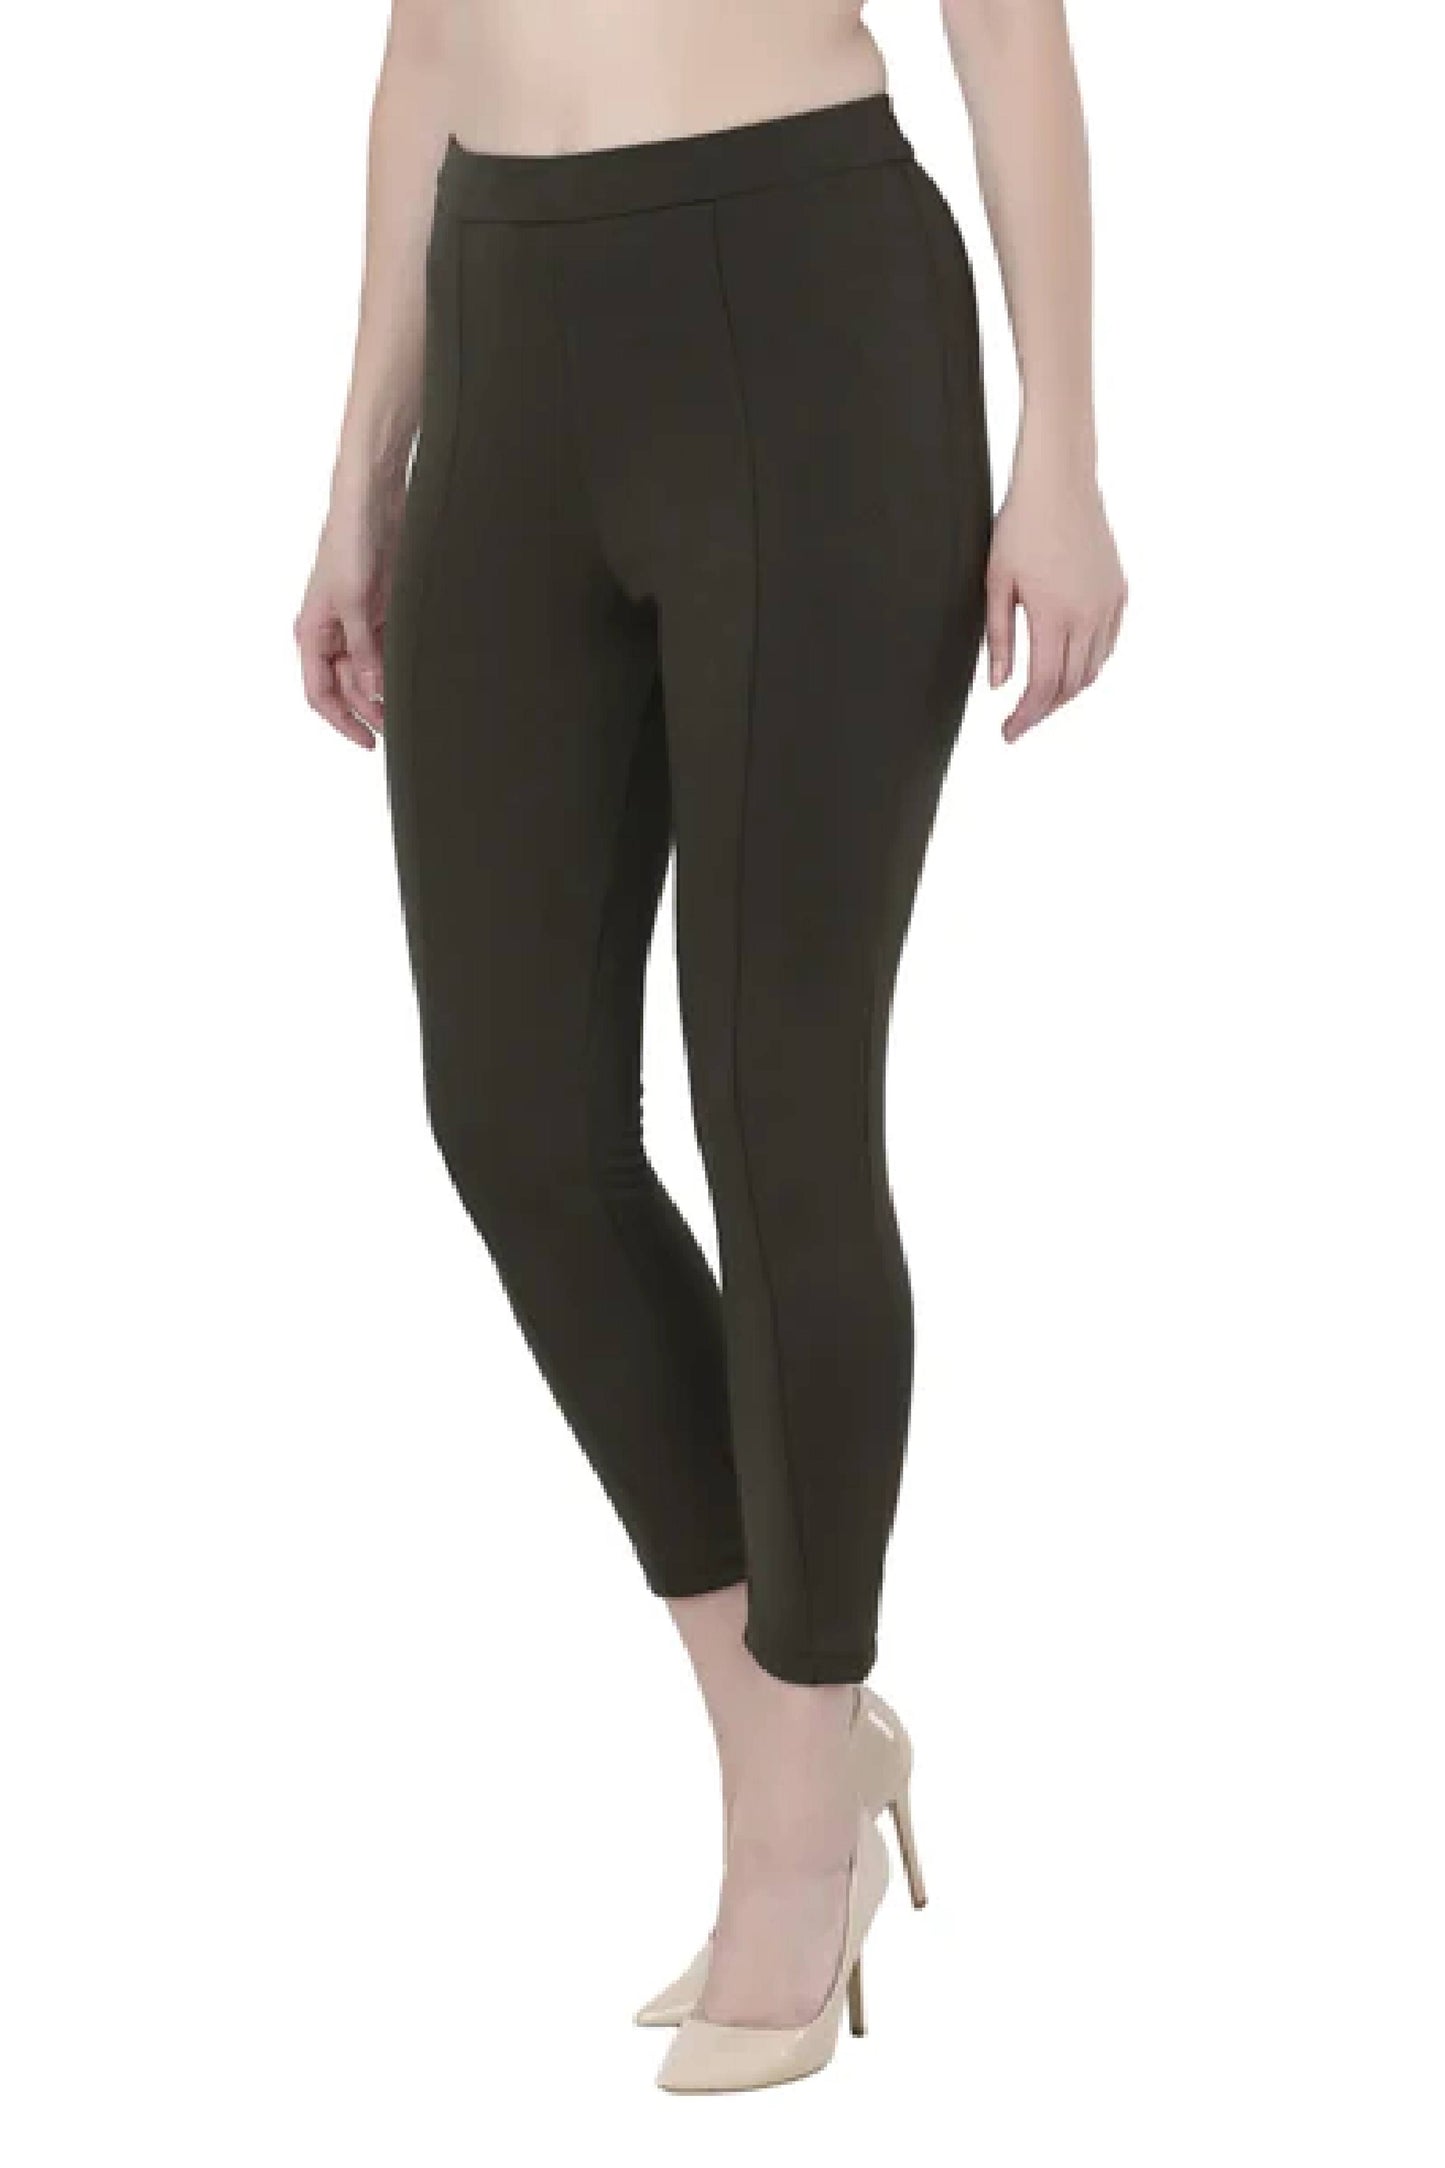 Stretchable Jeggings For Women Wear